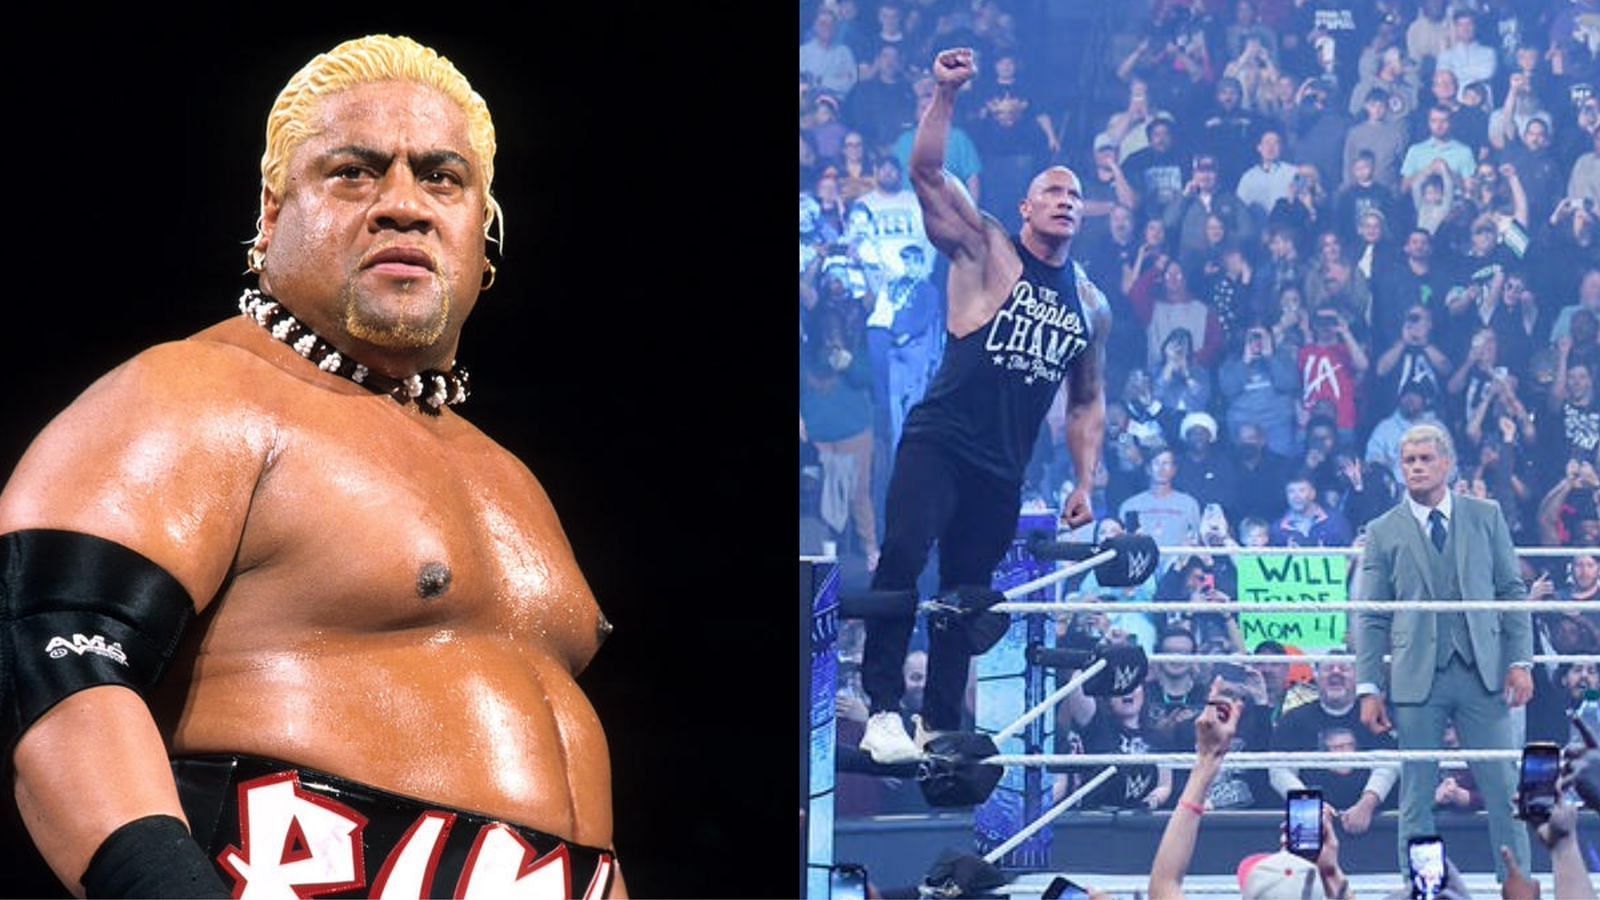 Rikishi is a WWE Hall of Famer and The Rock